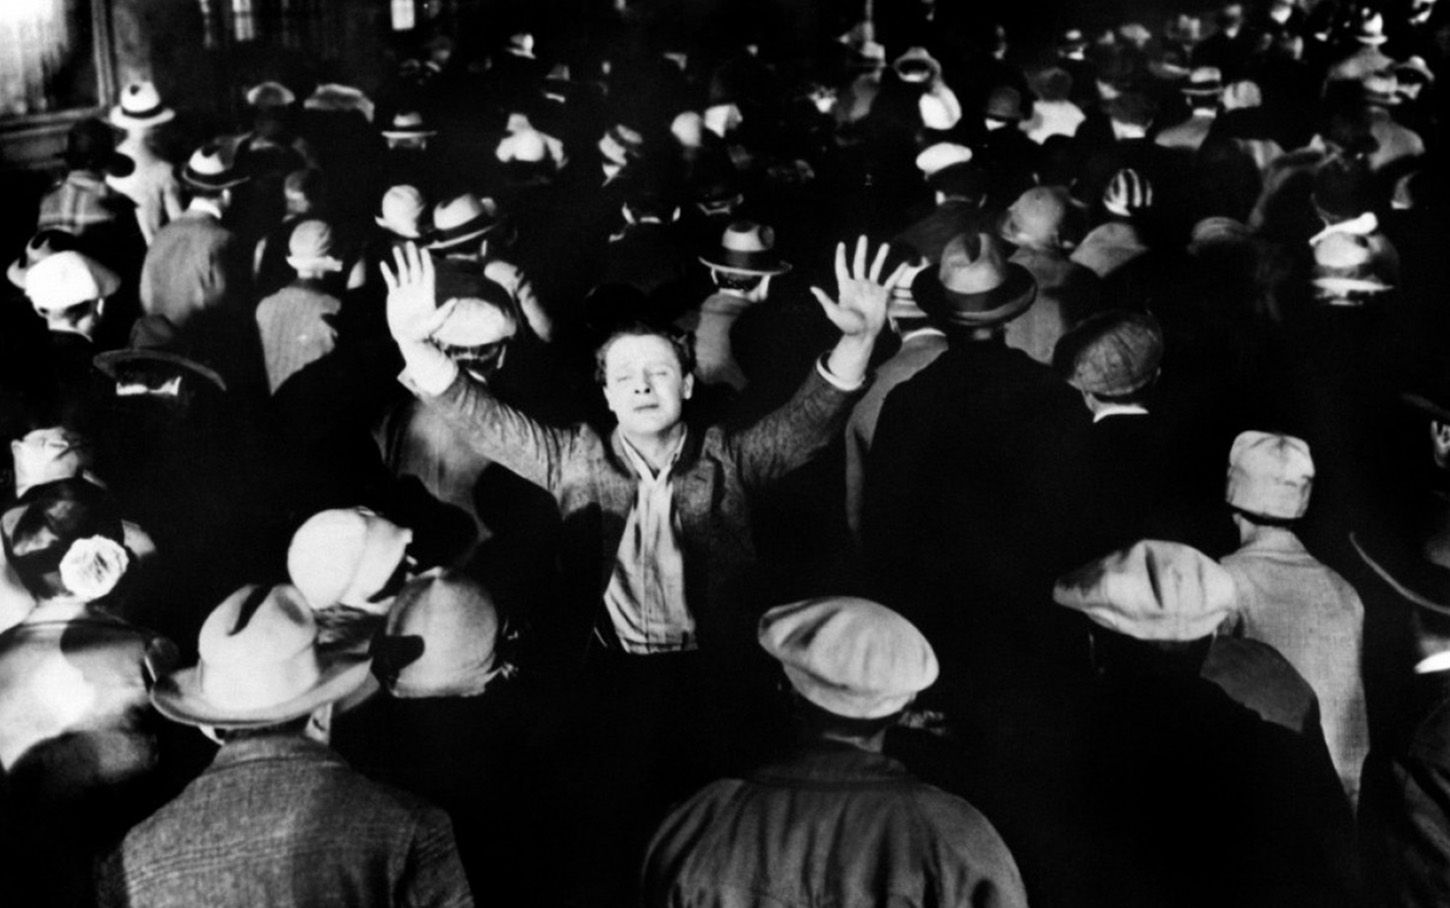  THE CROWD (1928)